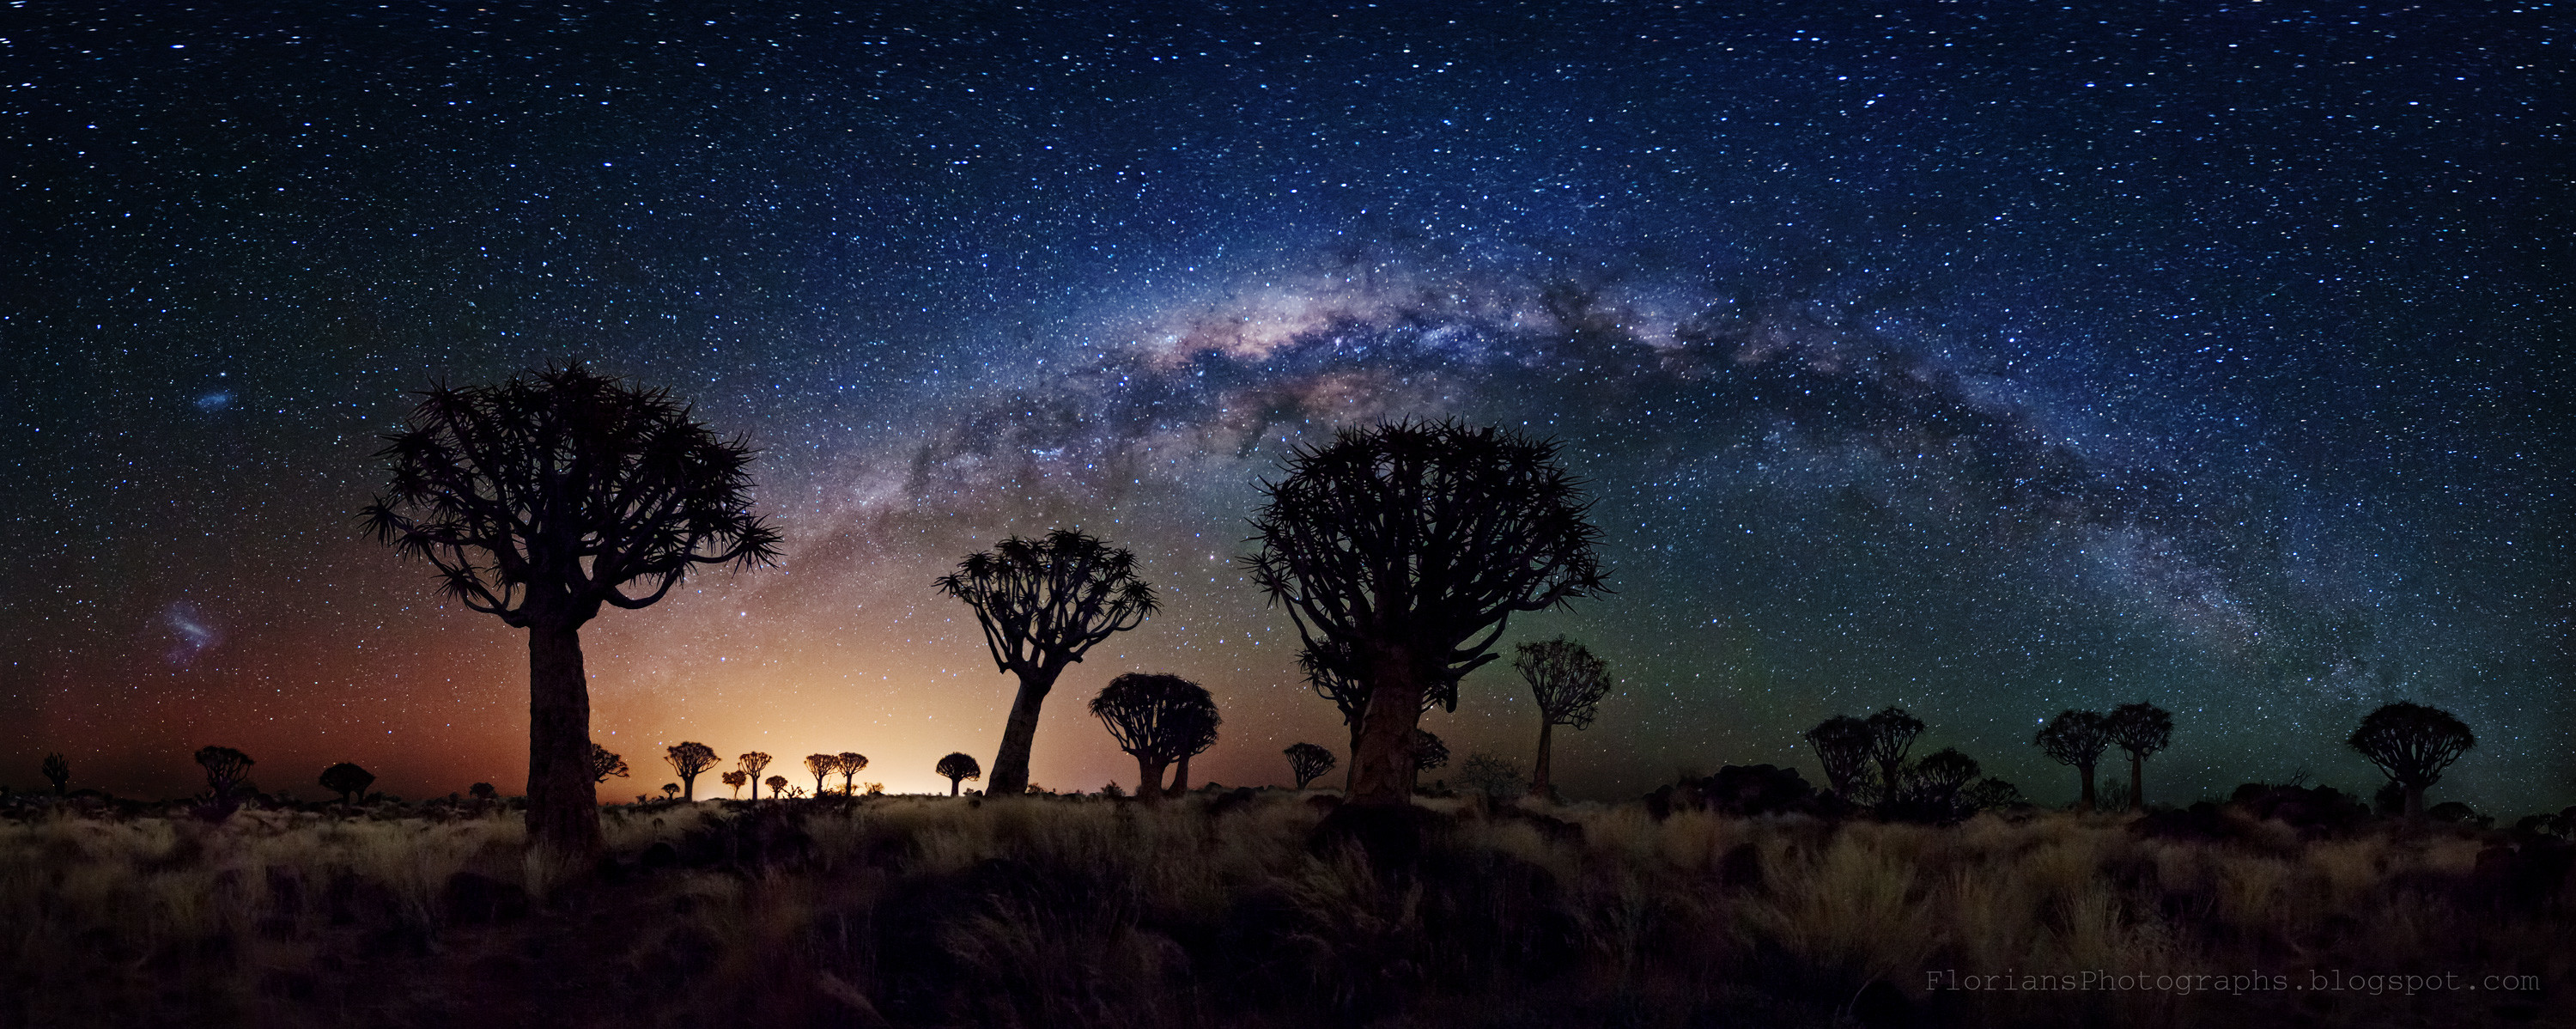 3000x1198 Milky Way over Quiver Trees (widescreen)